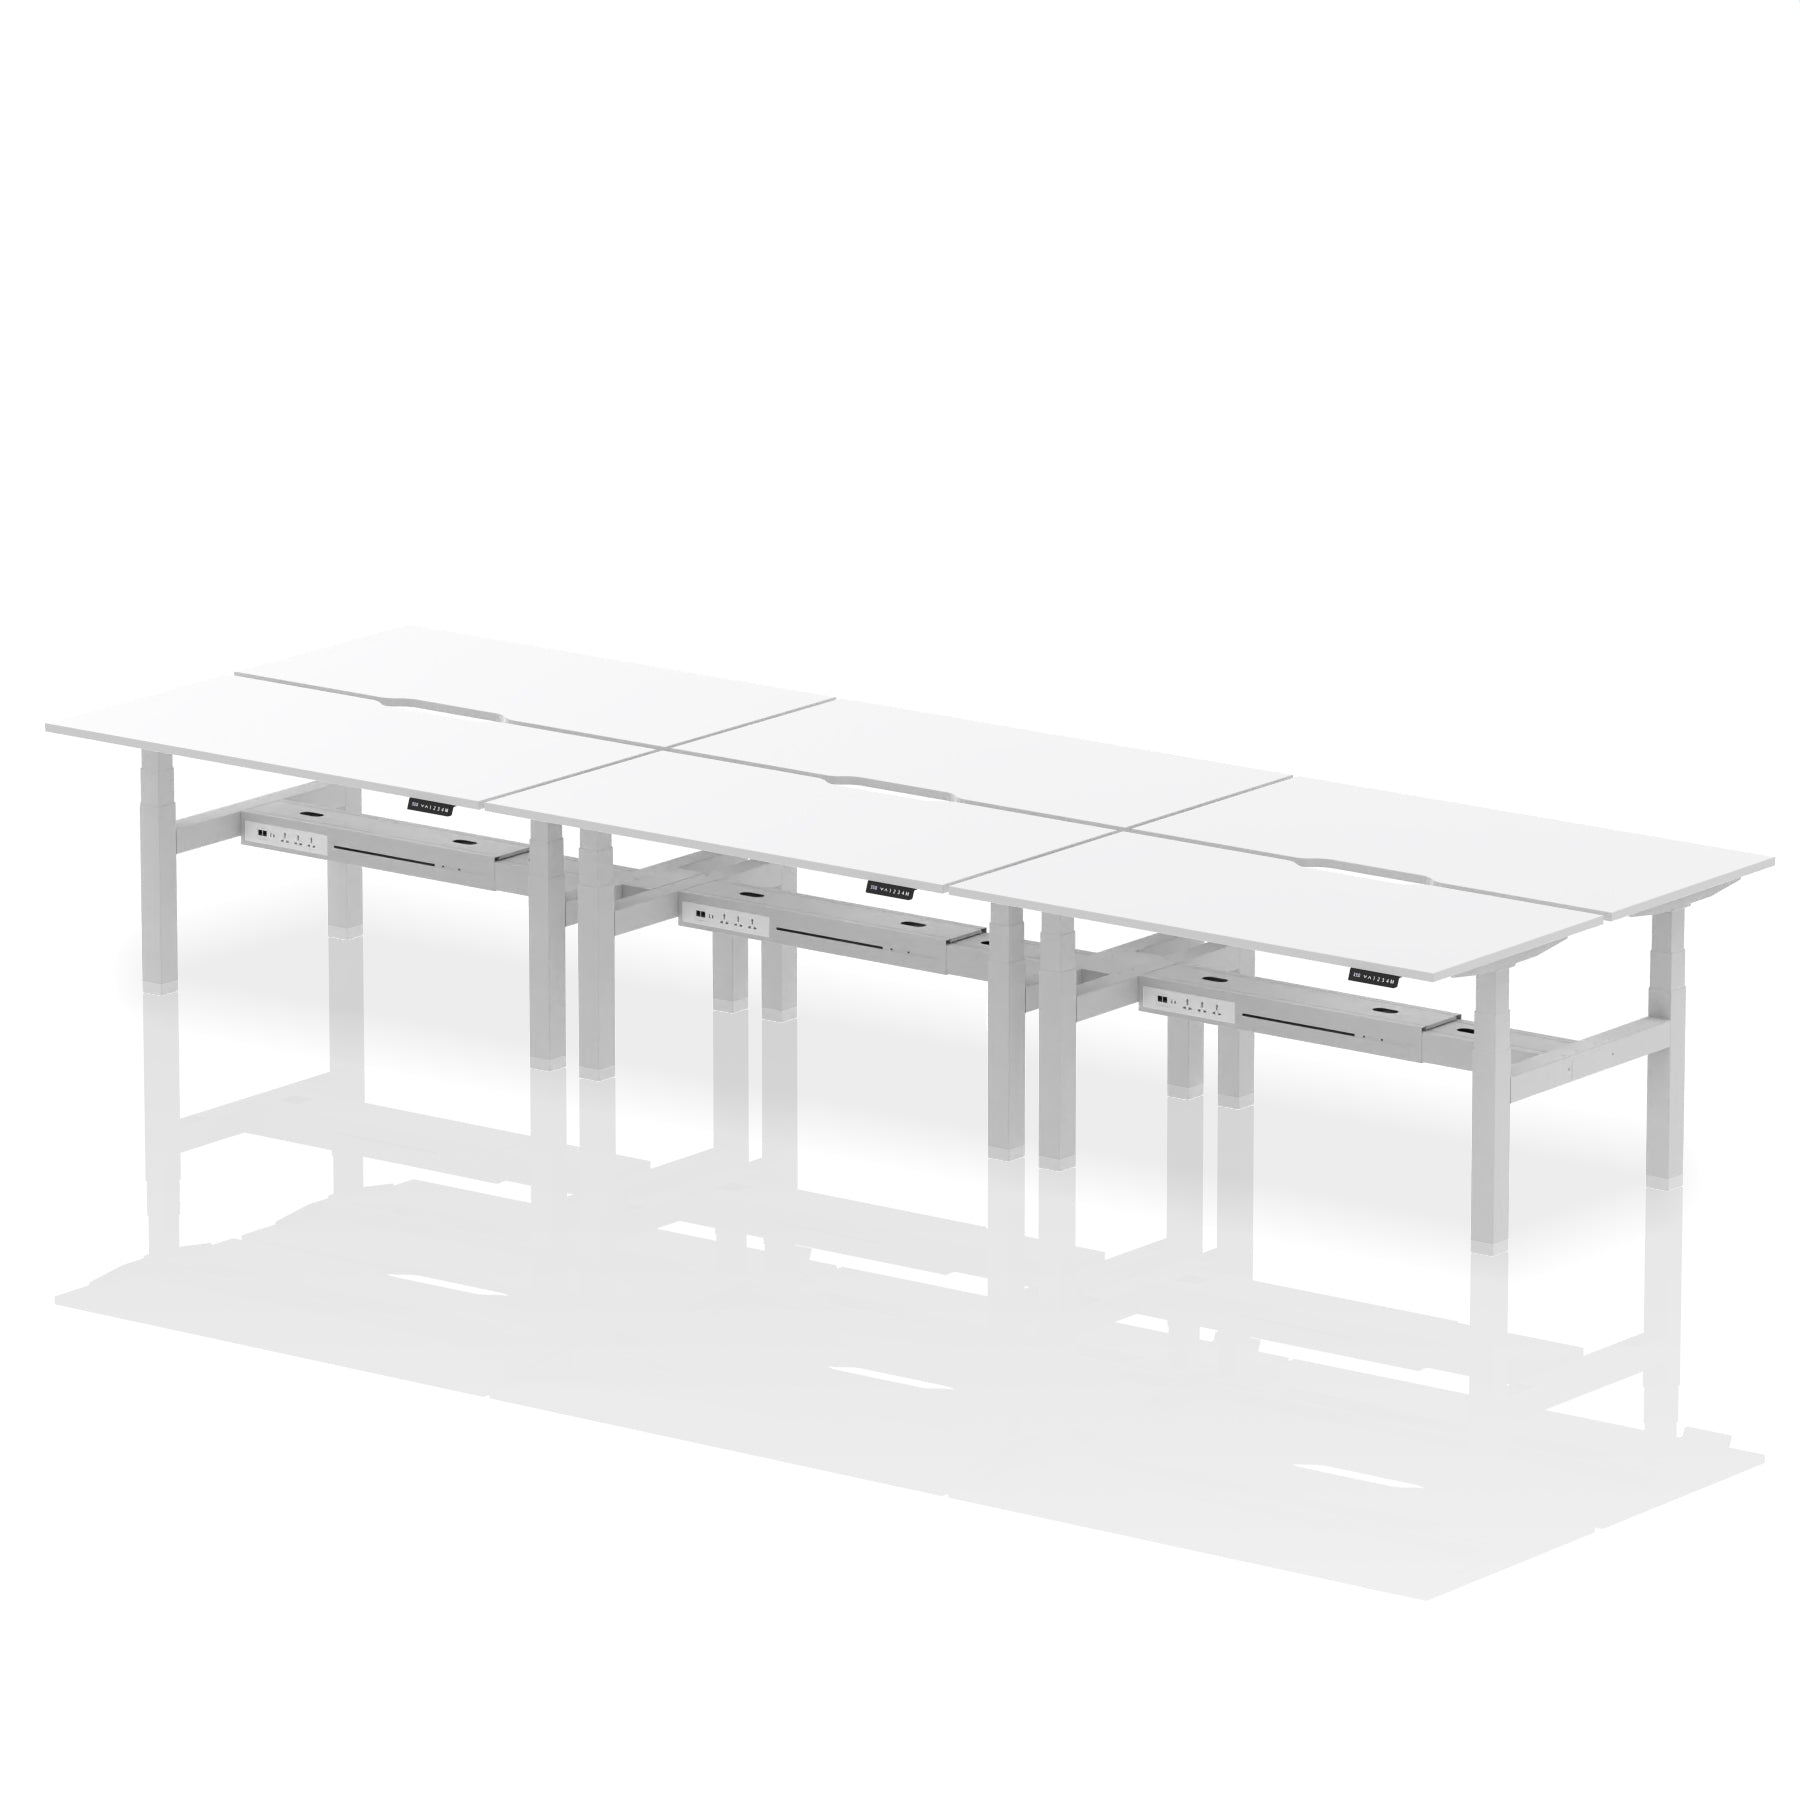 Air Back-to-Back Scalloped Edge Height Adjustable Bench Desk - 6 Person